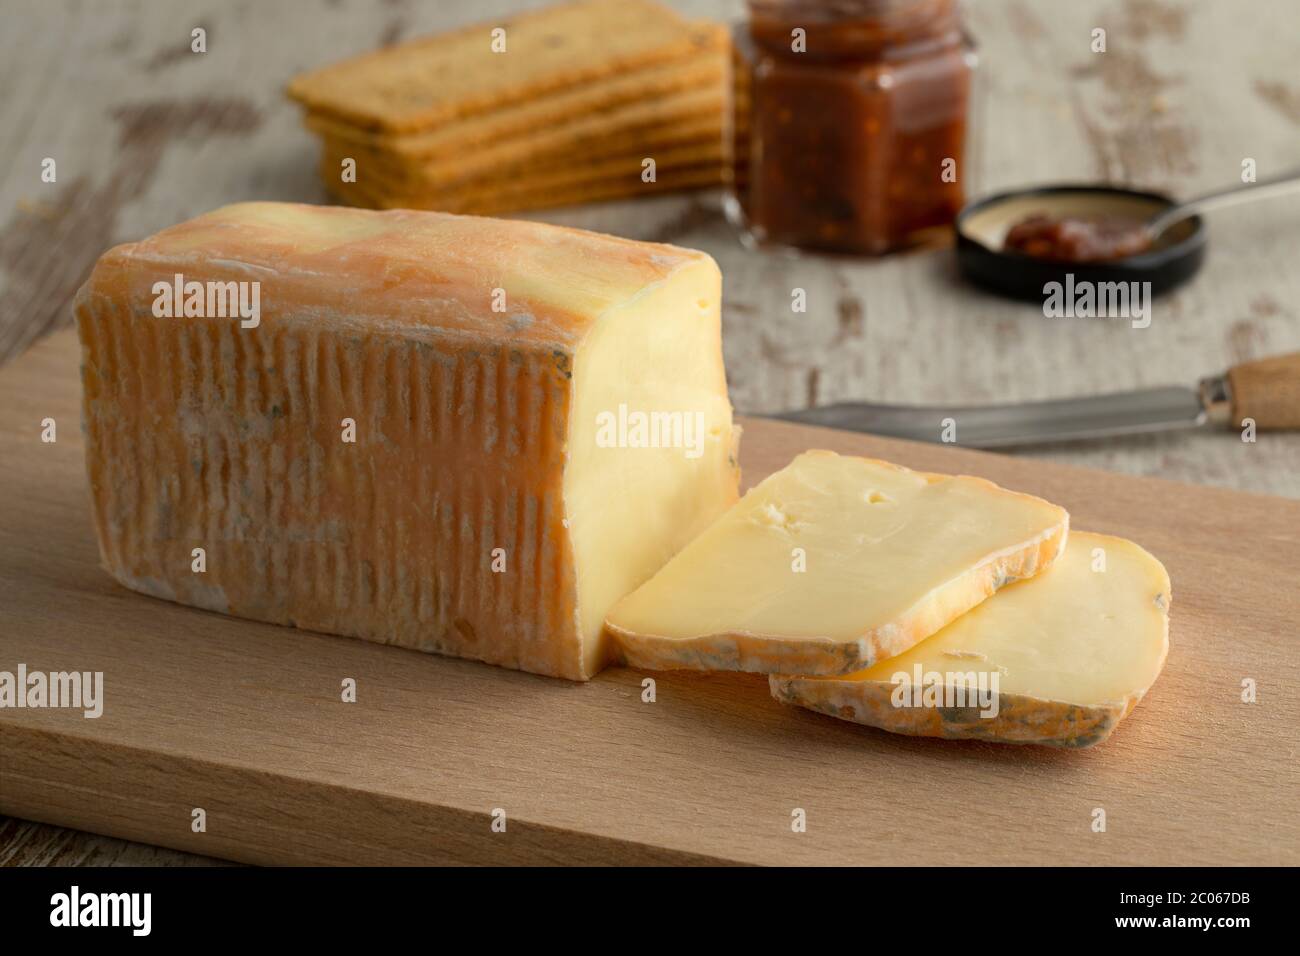 Piece and slices of traditional Italian Taleggio dop cheese close up on a cutting board Stock Photo